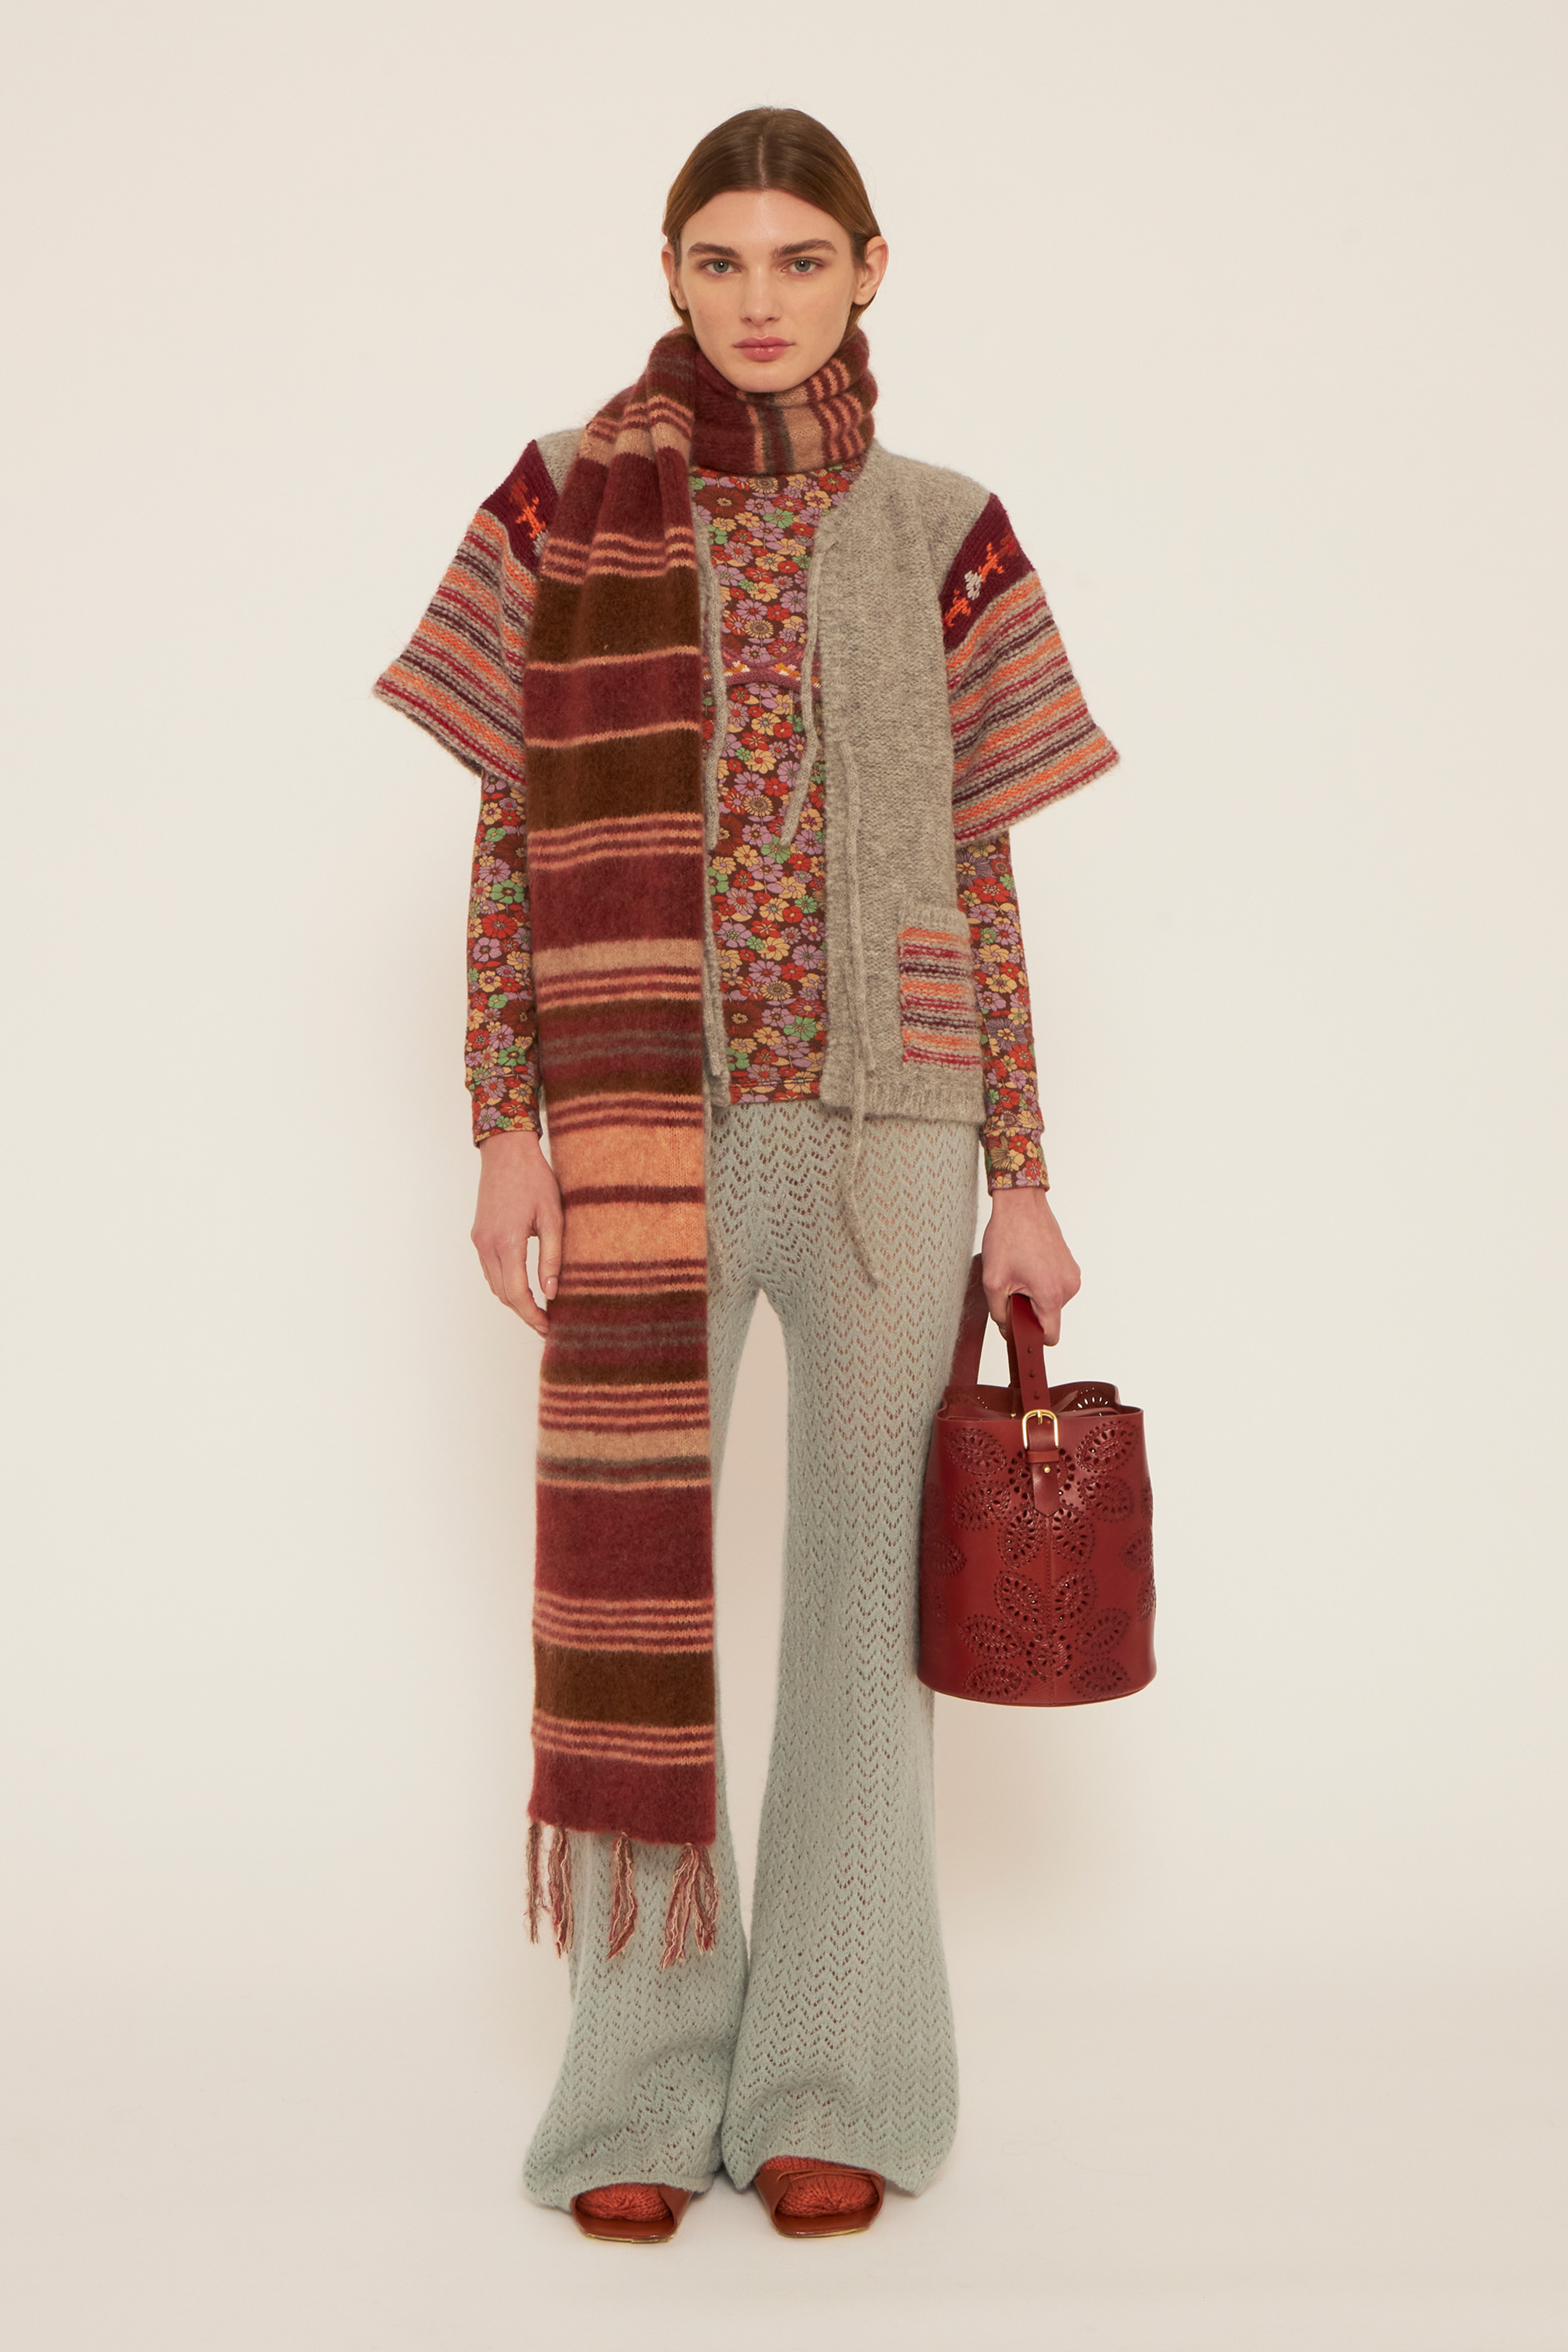 A girl wearing a craft light blue pants, a flower printed t-neck, a grey cardigan and a big burgundy shades scarf.